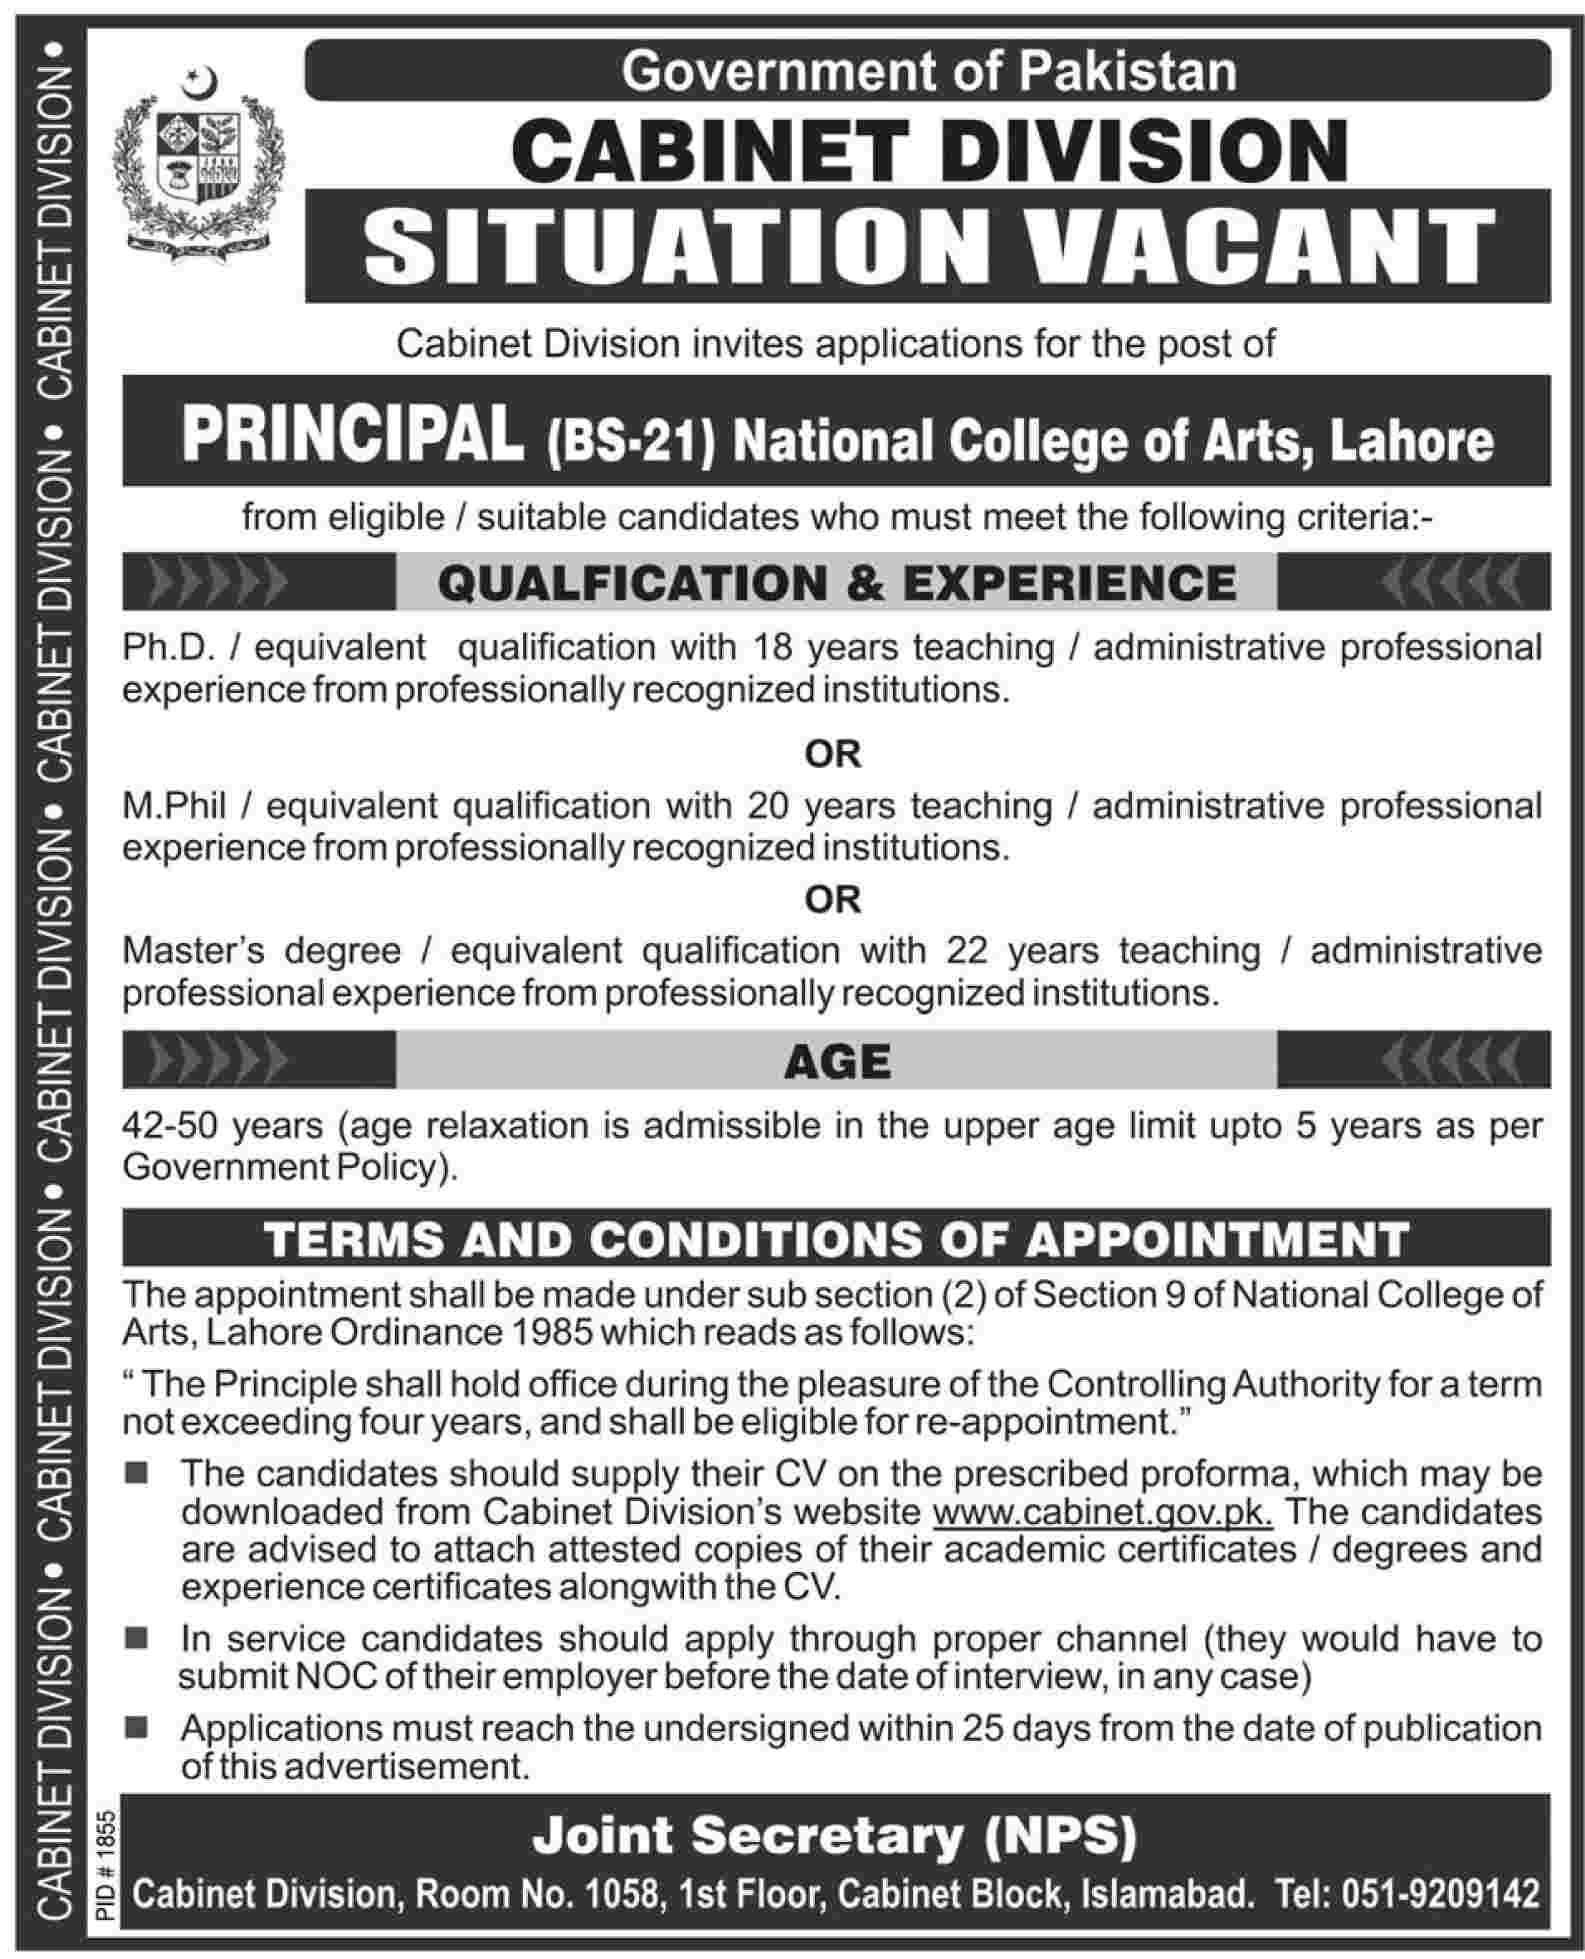 Situation Vacant in Cabinet Division Government of Pakistan